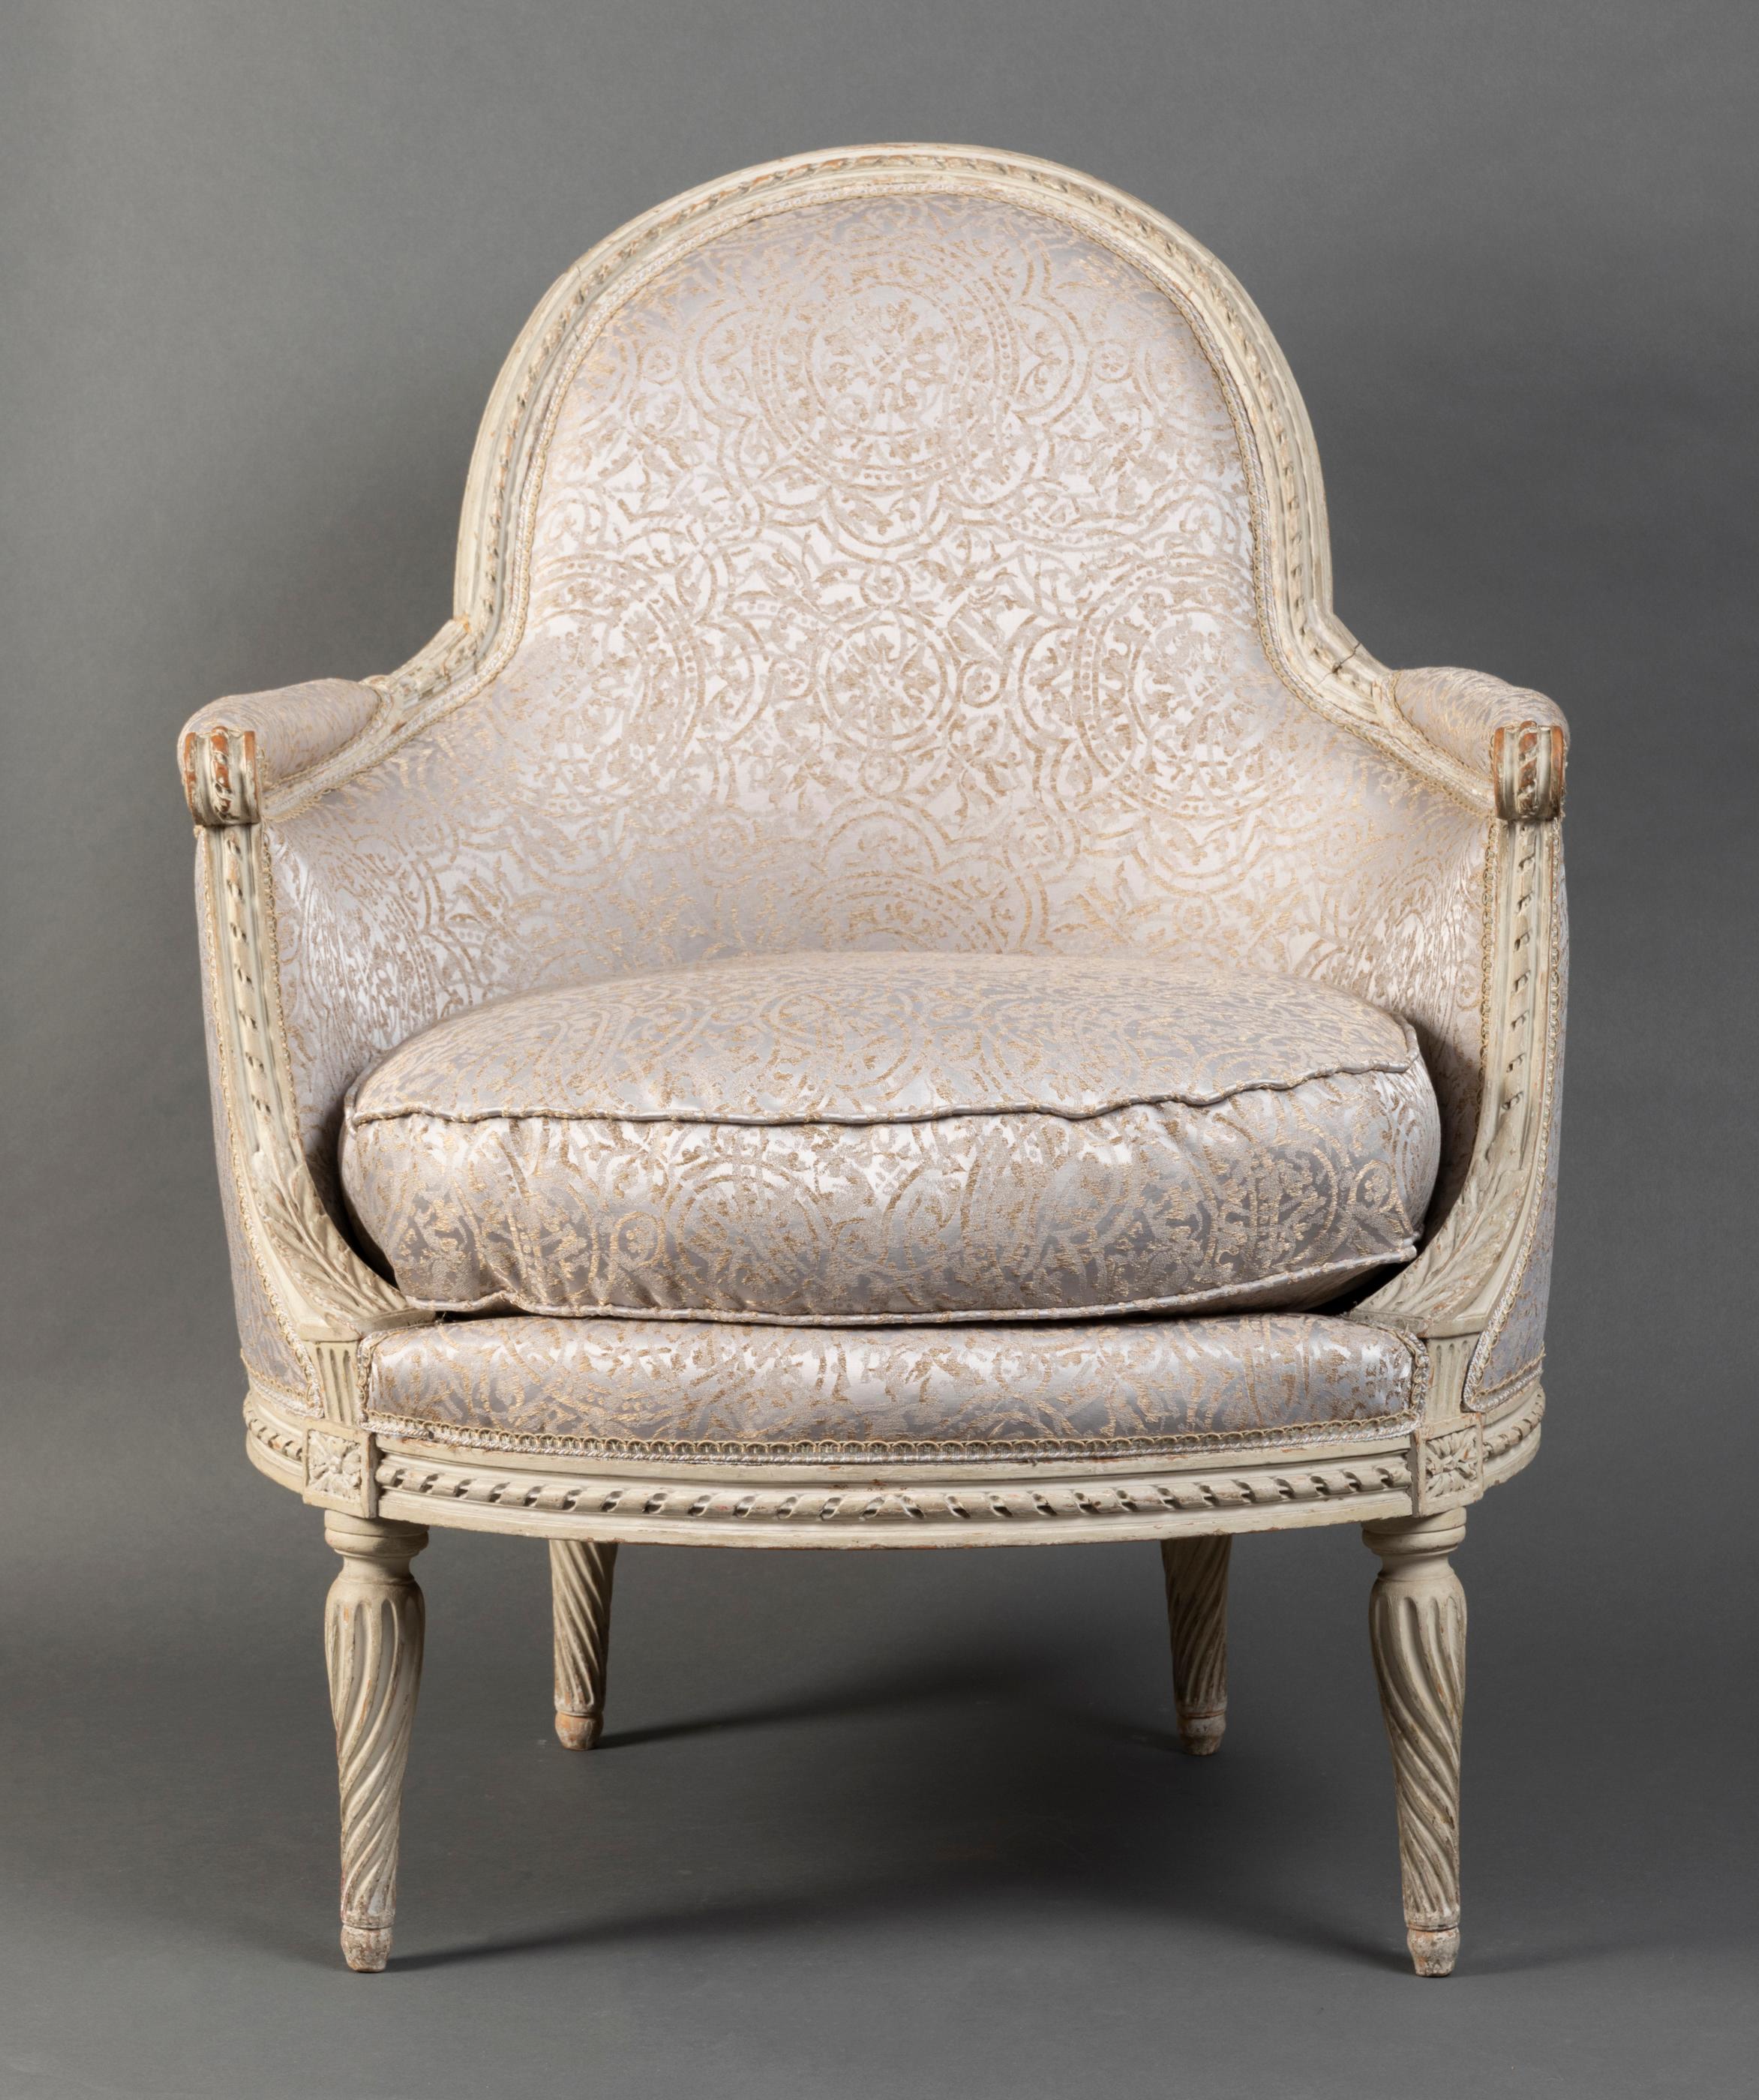 Pair of Bergère Chairs from the Louis XVI Period Stamped, Delanois, 18th Century For Sale 7